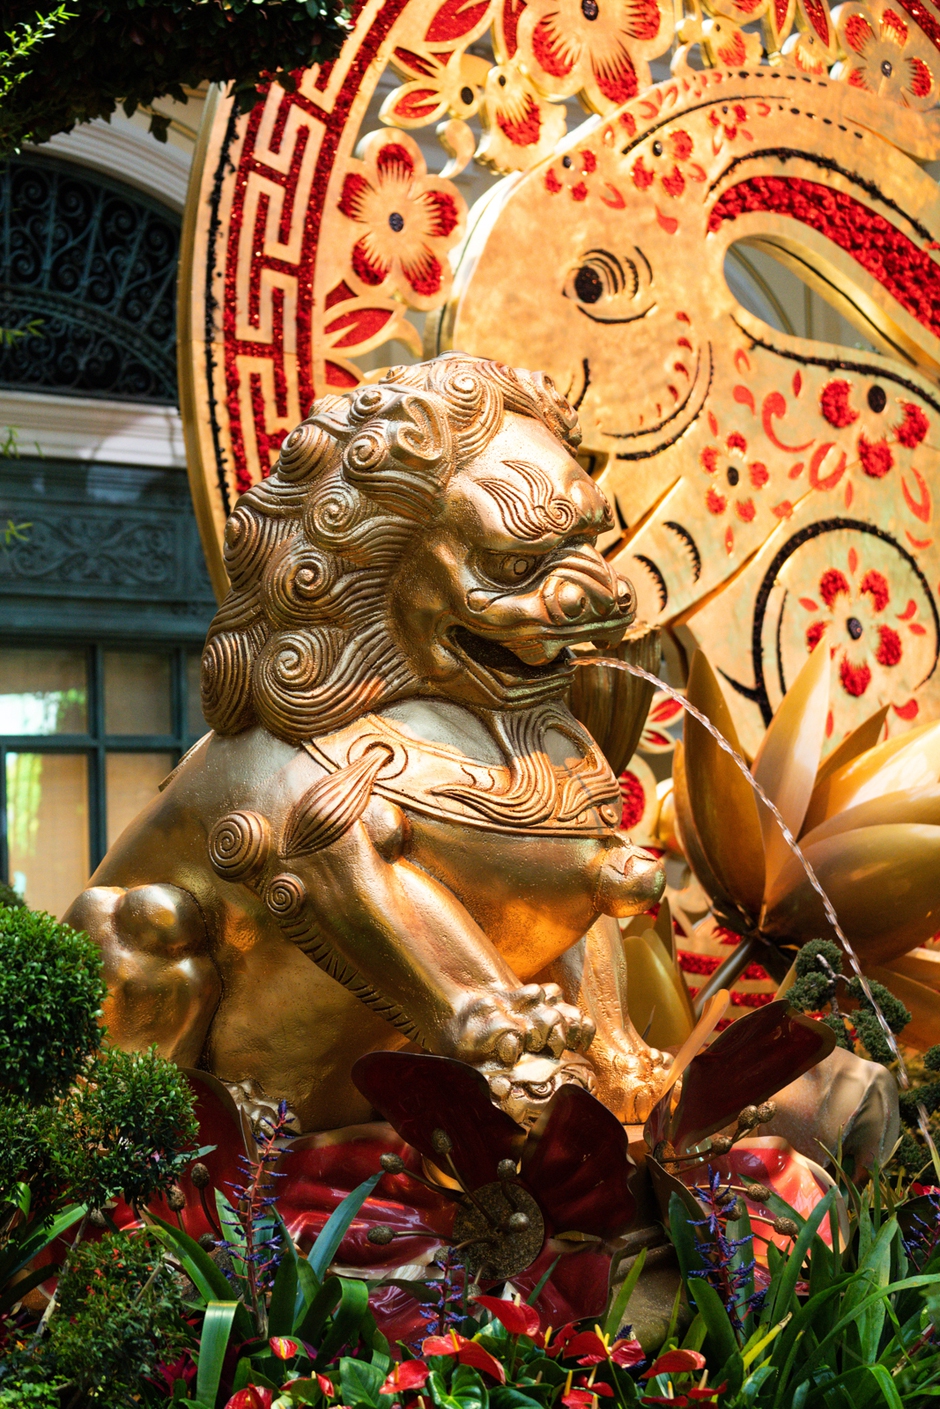 Bellagio Conservatory debuts new Lunar New Year display